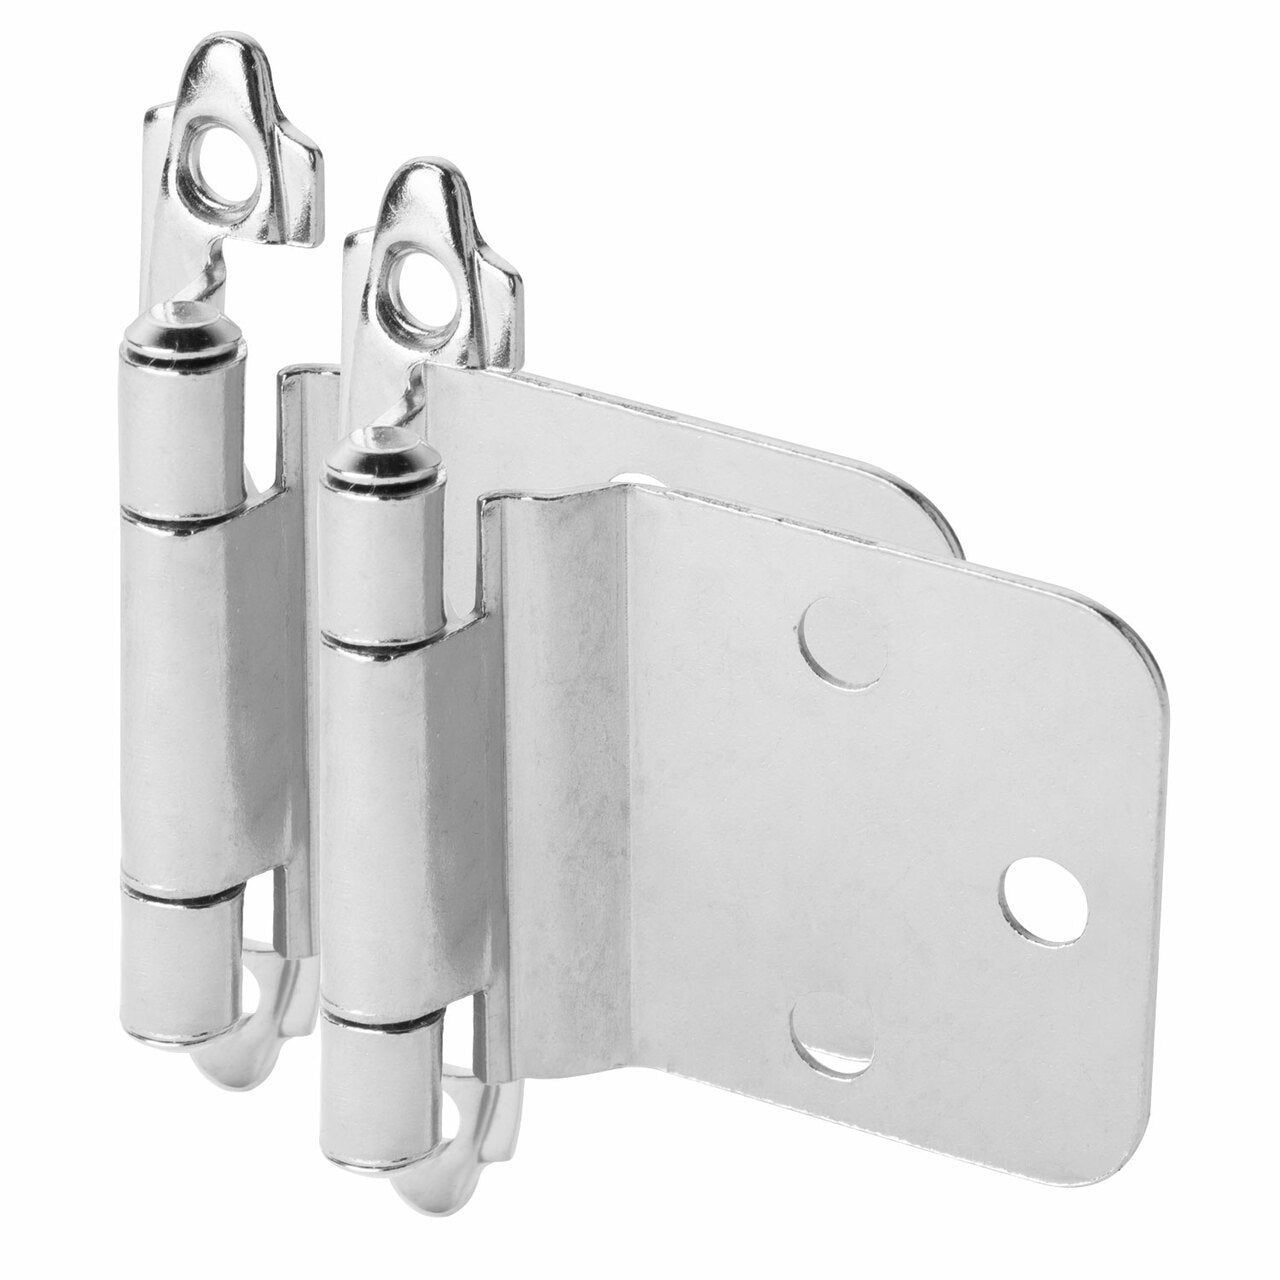 Cosmas 16890-CH Polished Chrome Hinge Variable Overlay with 30 Degree Reverse Bevel (Pair)